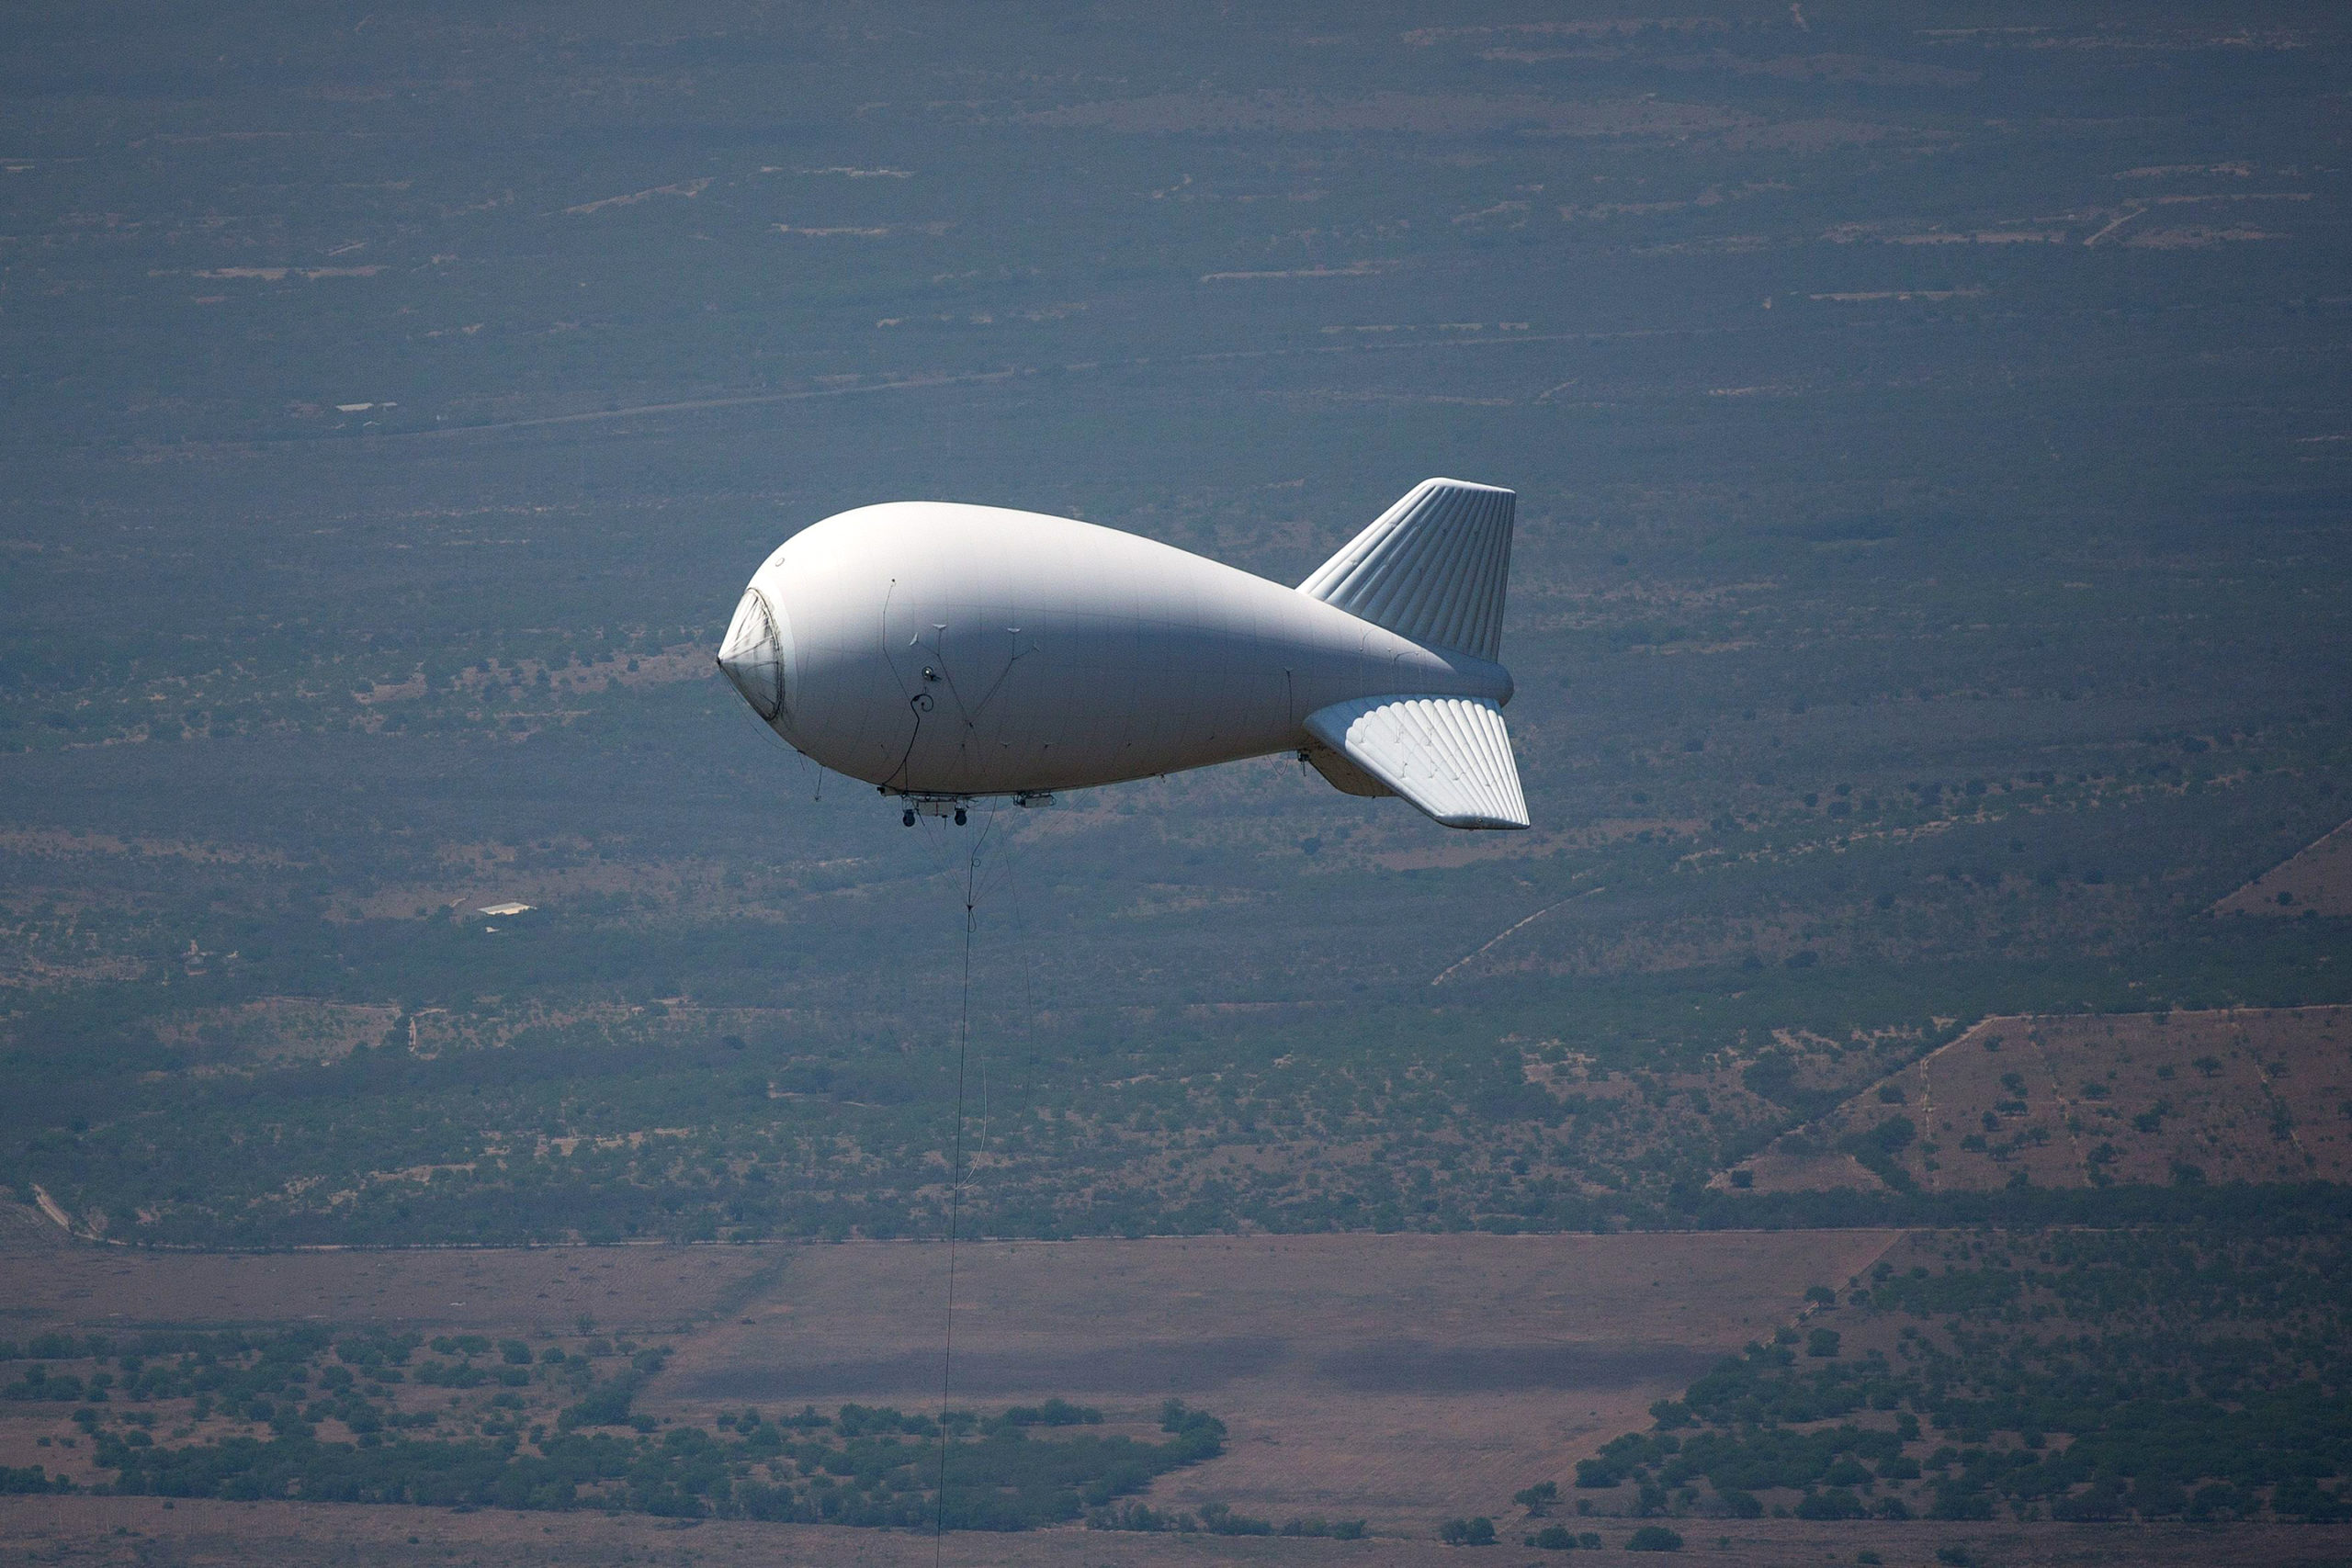 The Pentagon's next big weapon is a fleet of massive high-altitude balloons